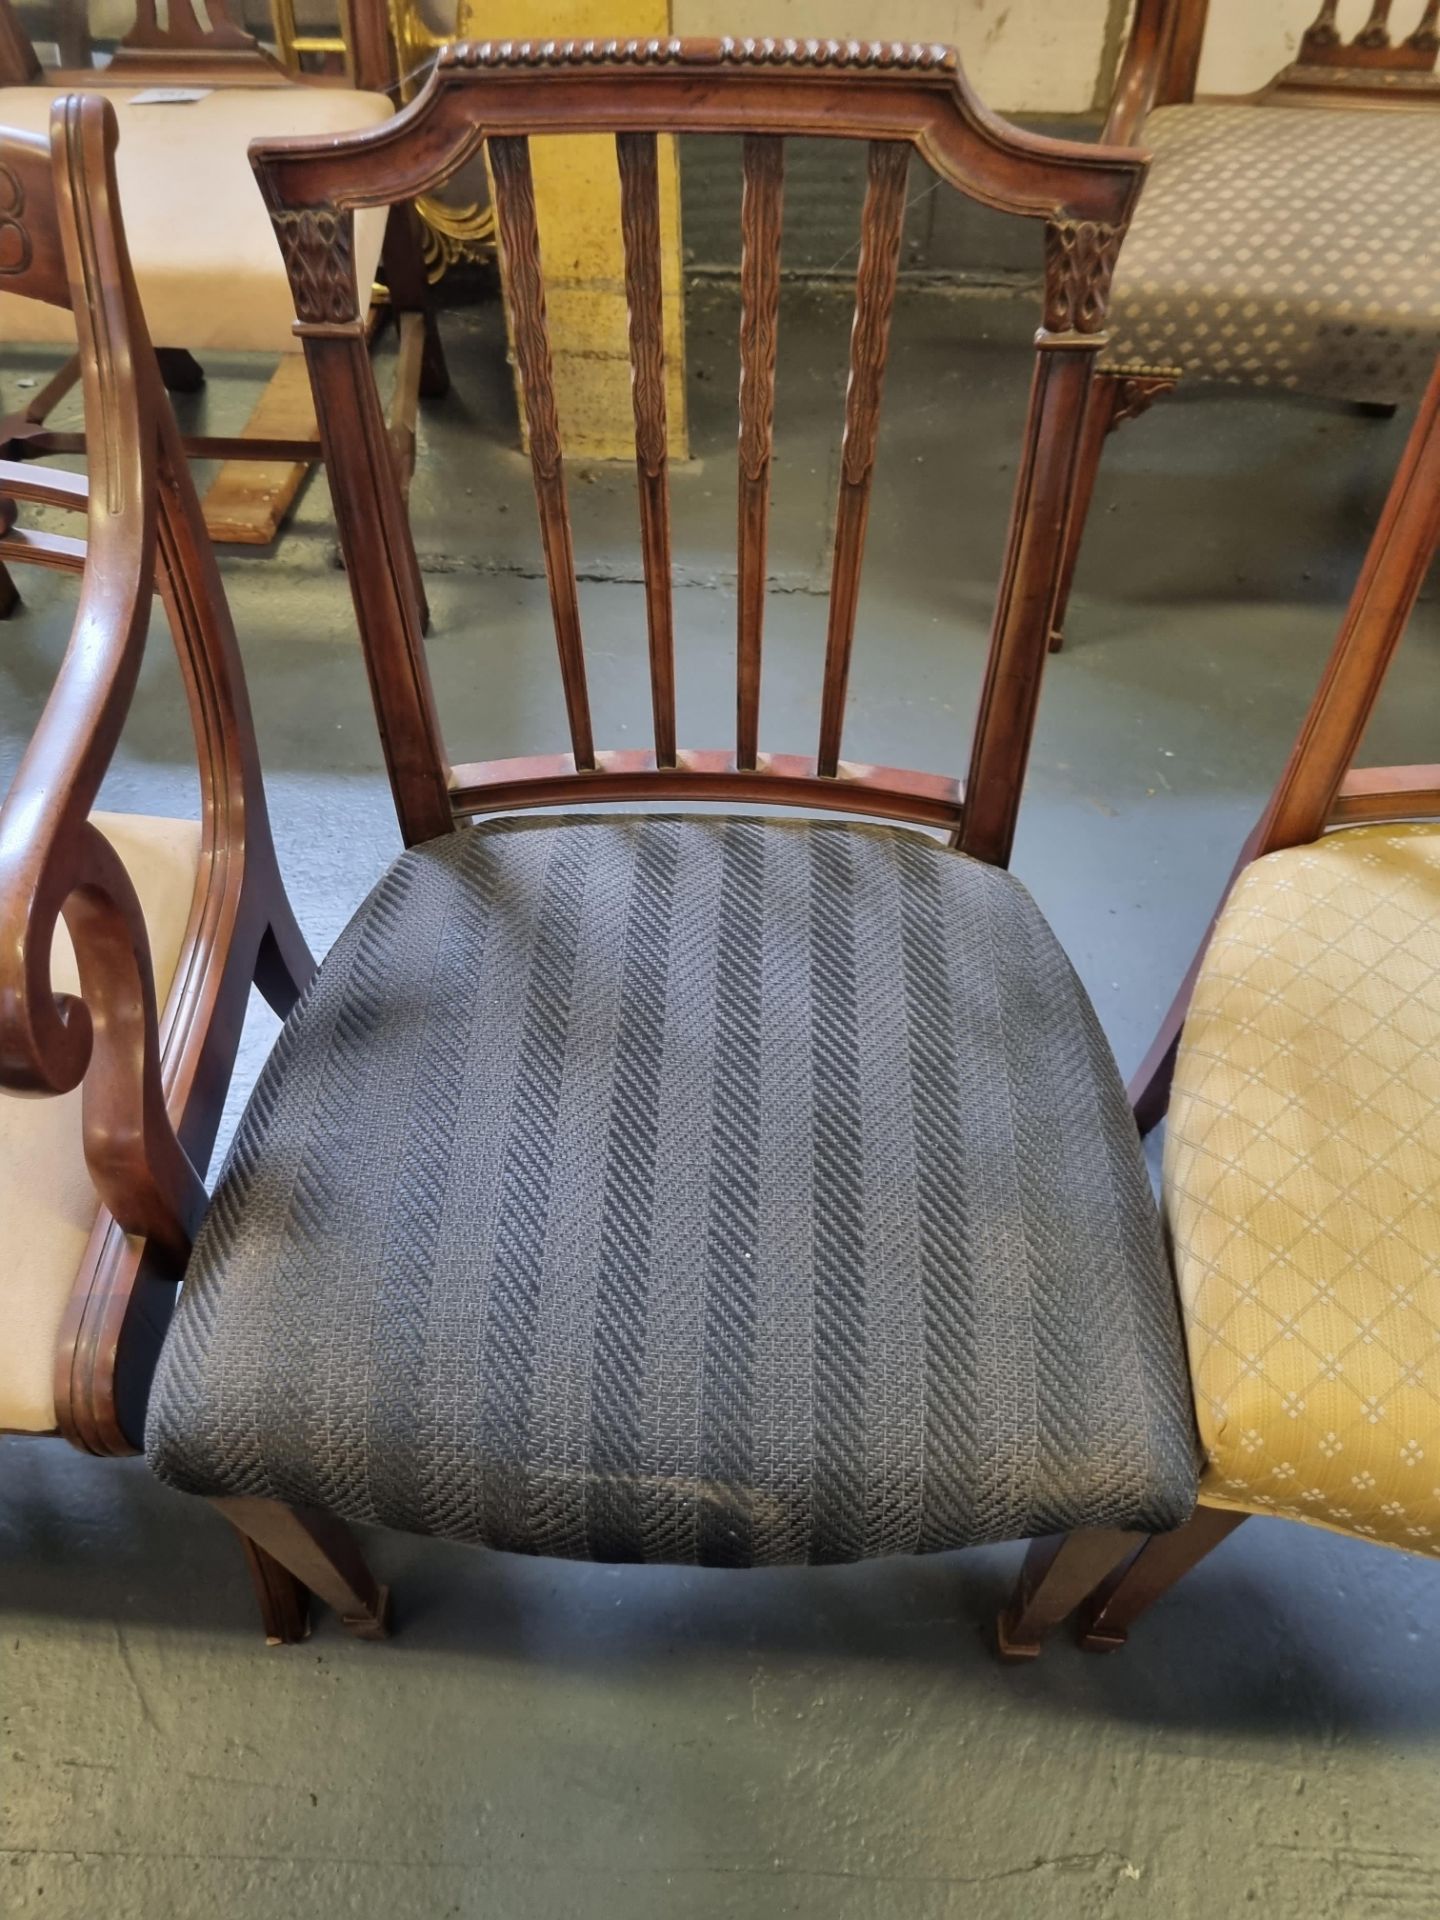 2 X Arthur Brett Sheraton-Style Mahogany Stick Back Dining Side Chair With Upholstered Seat - Image 2 of 3